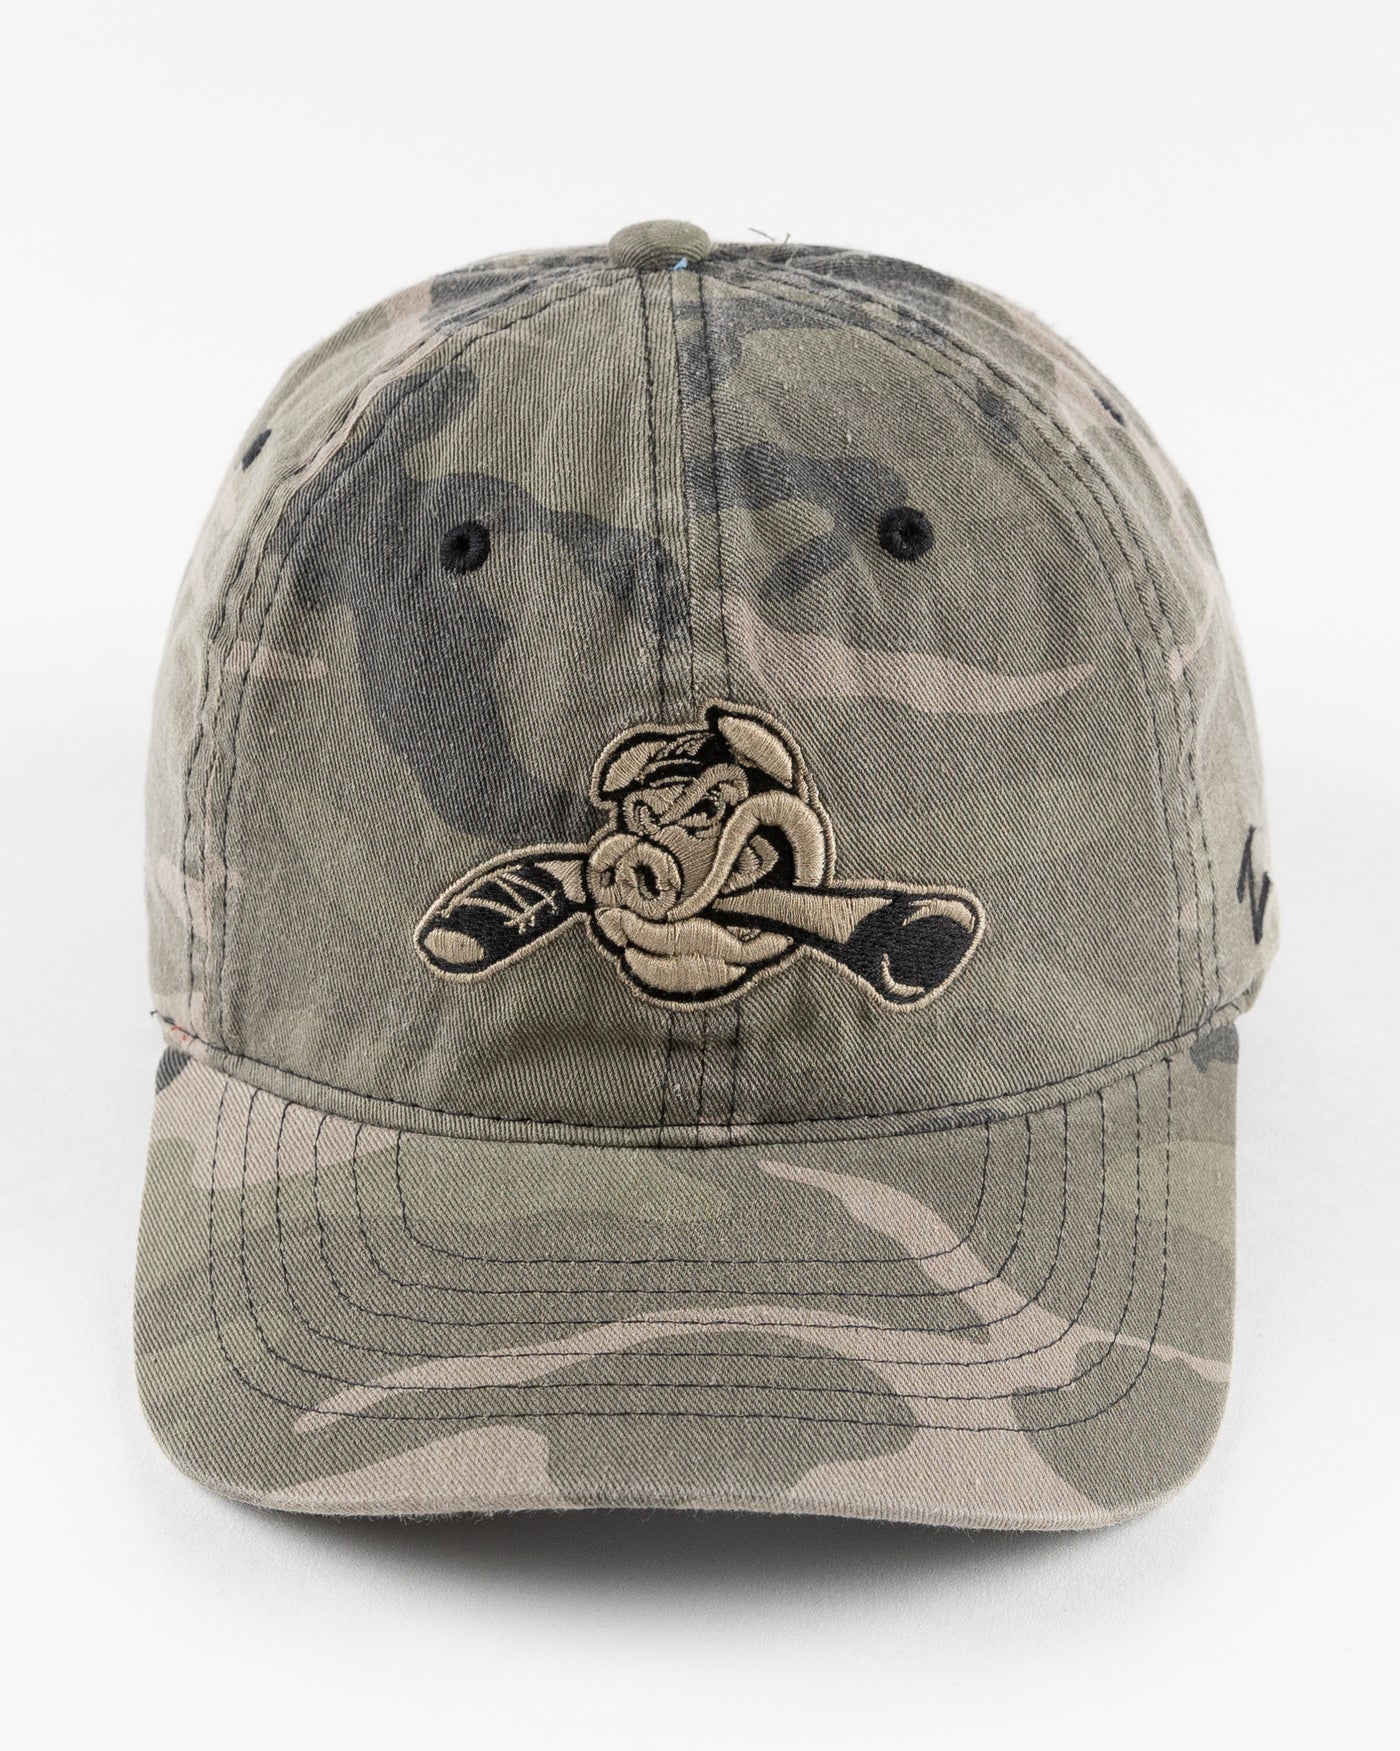 camo Zephyr adjustable cap with Hammy embroidered on front - front lay flat